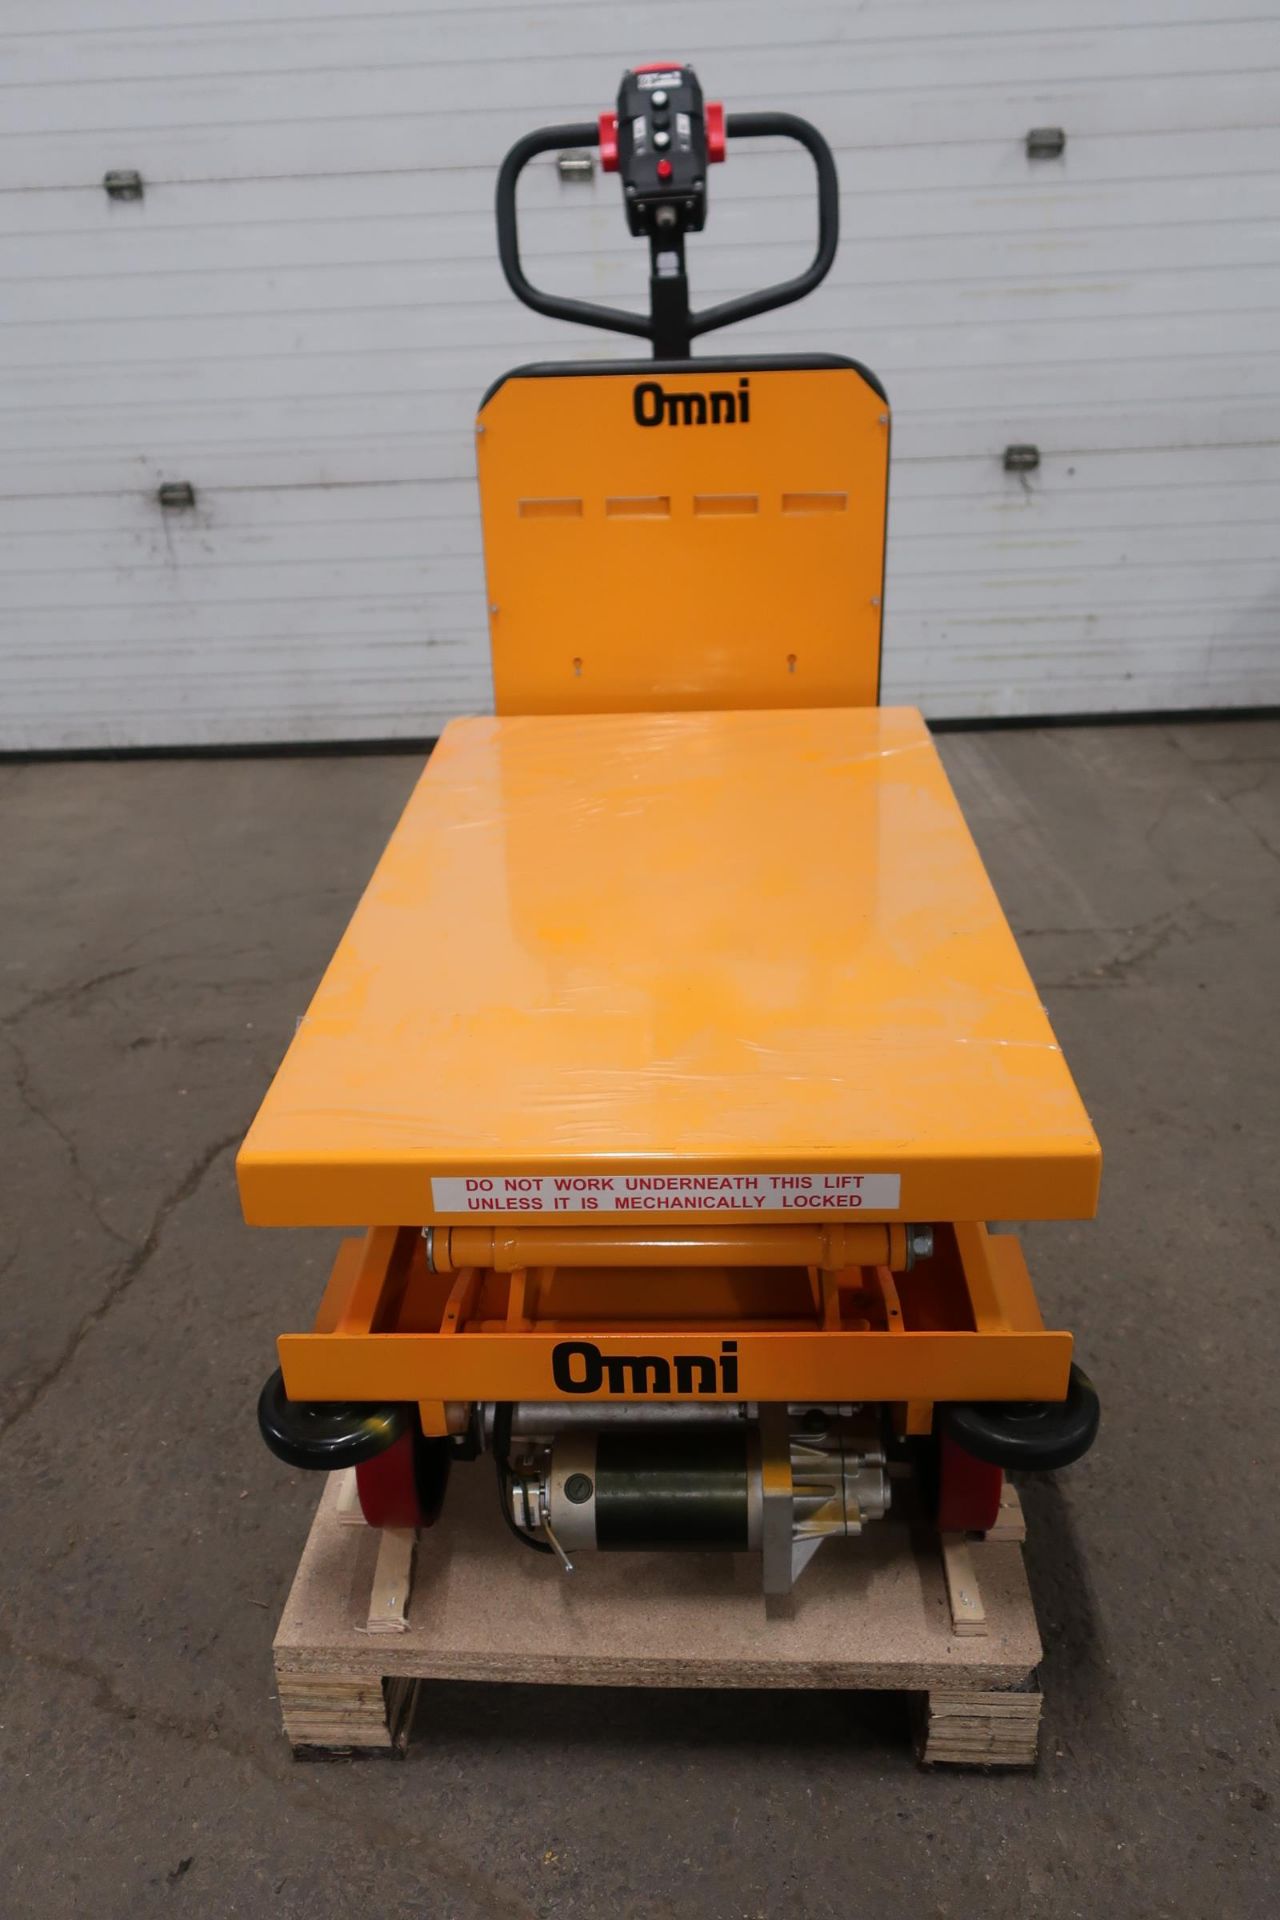 MINT Omni Motorized Lift Table Platform 500kg / 1100lbs capacity and 1720mm / 68" Lift Height UNUSED - Image 2 of 2